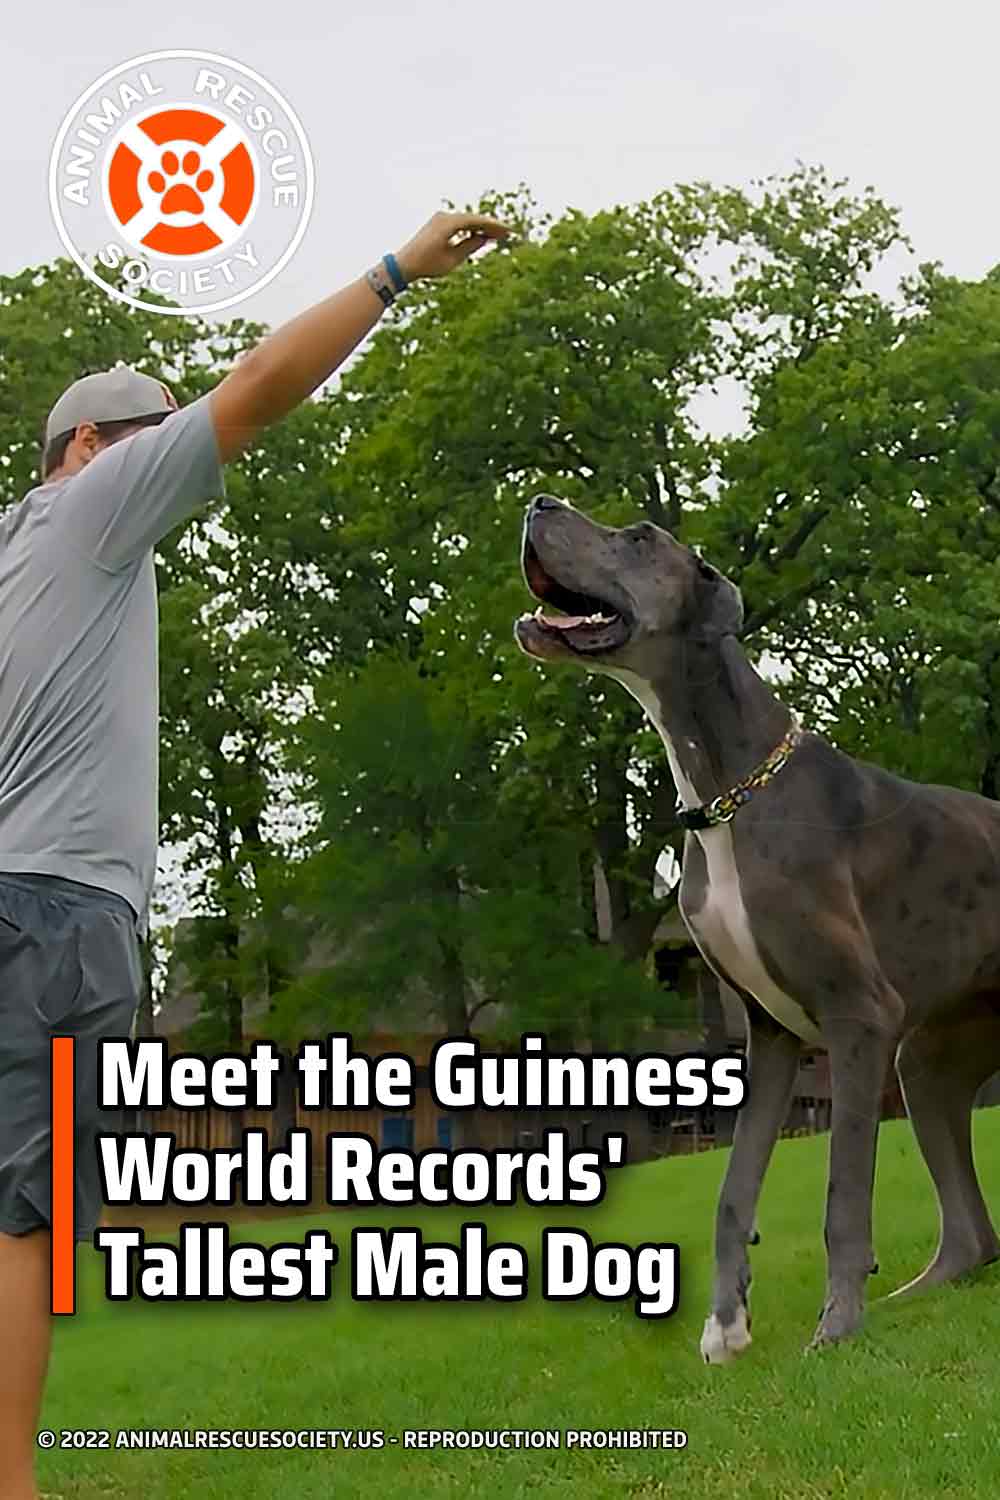 Meet the Guinness World Records\' Tallest Male Dog